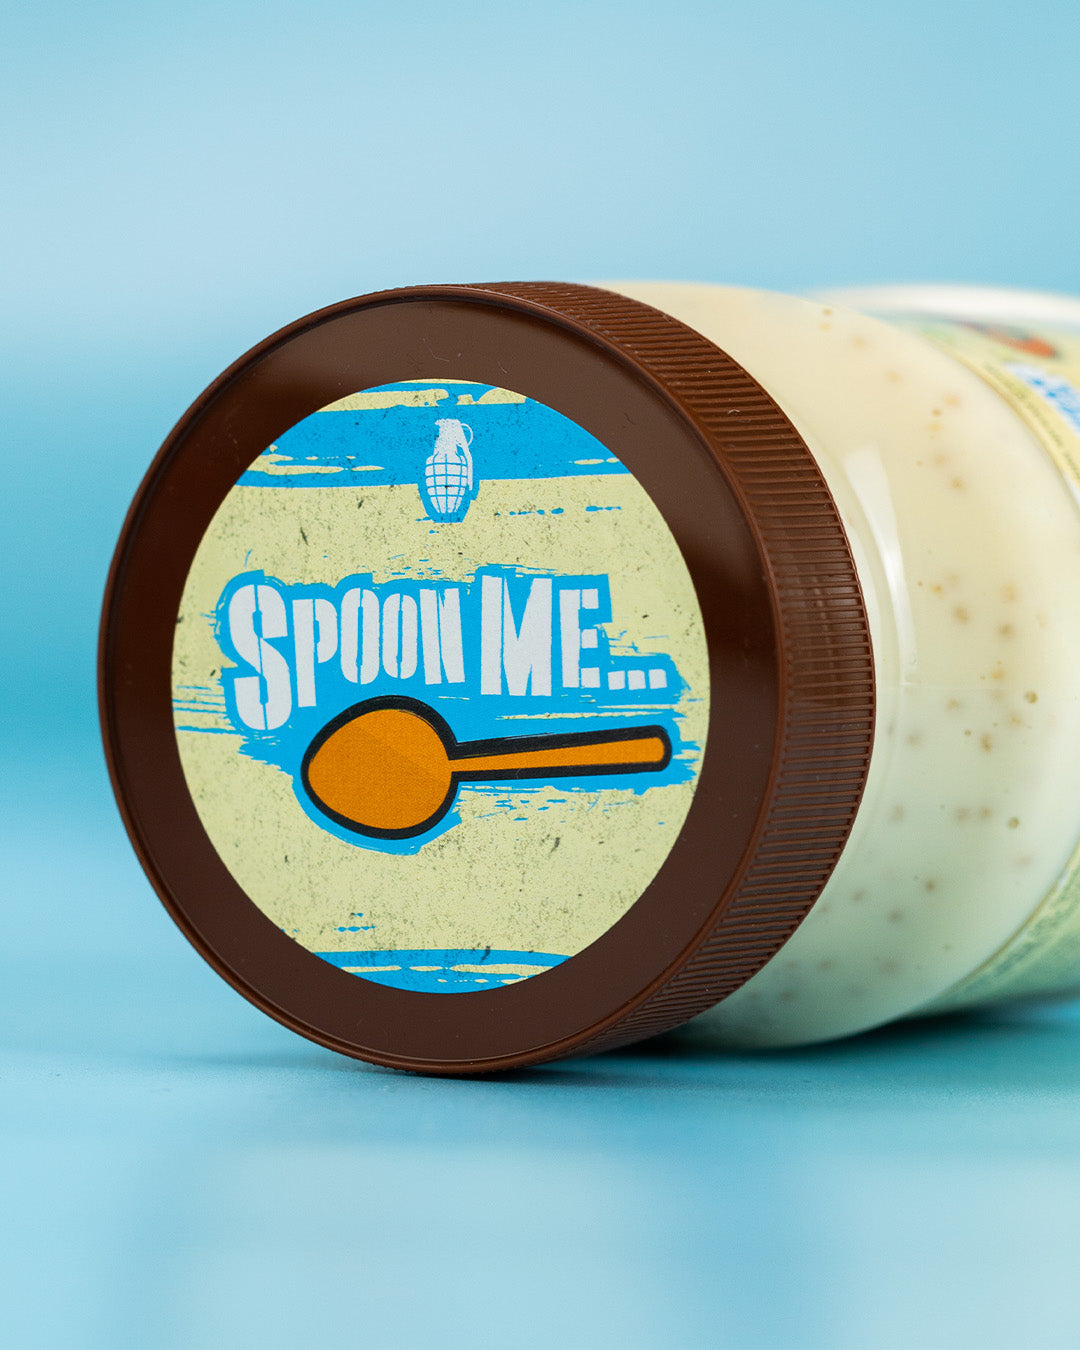 "Spoon me!" on Protein Spread lid